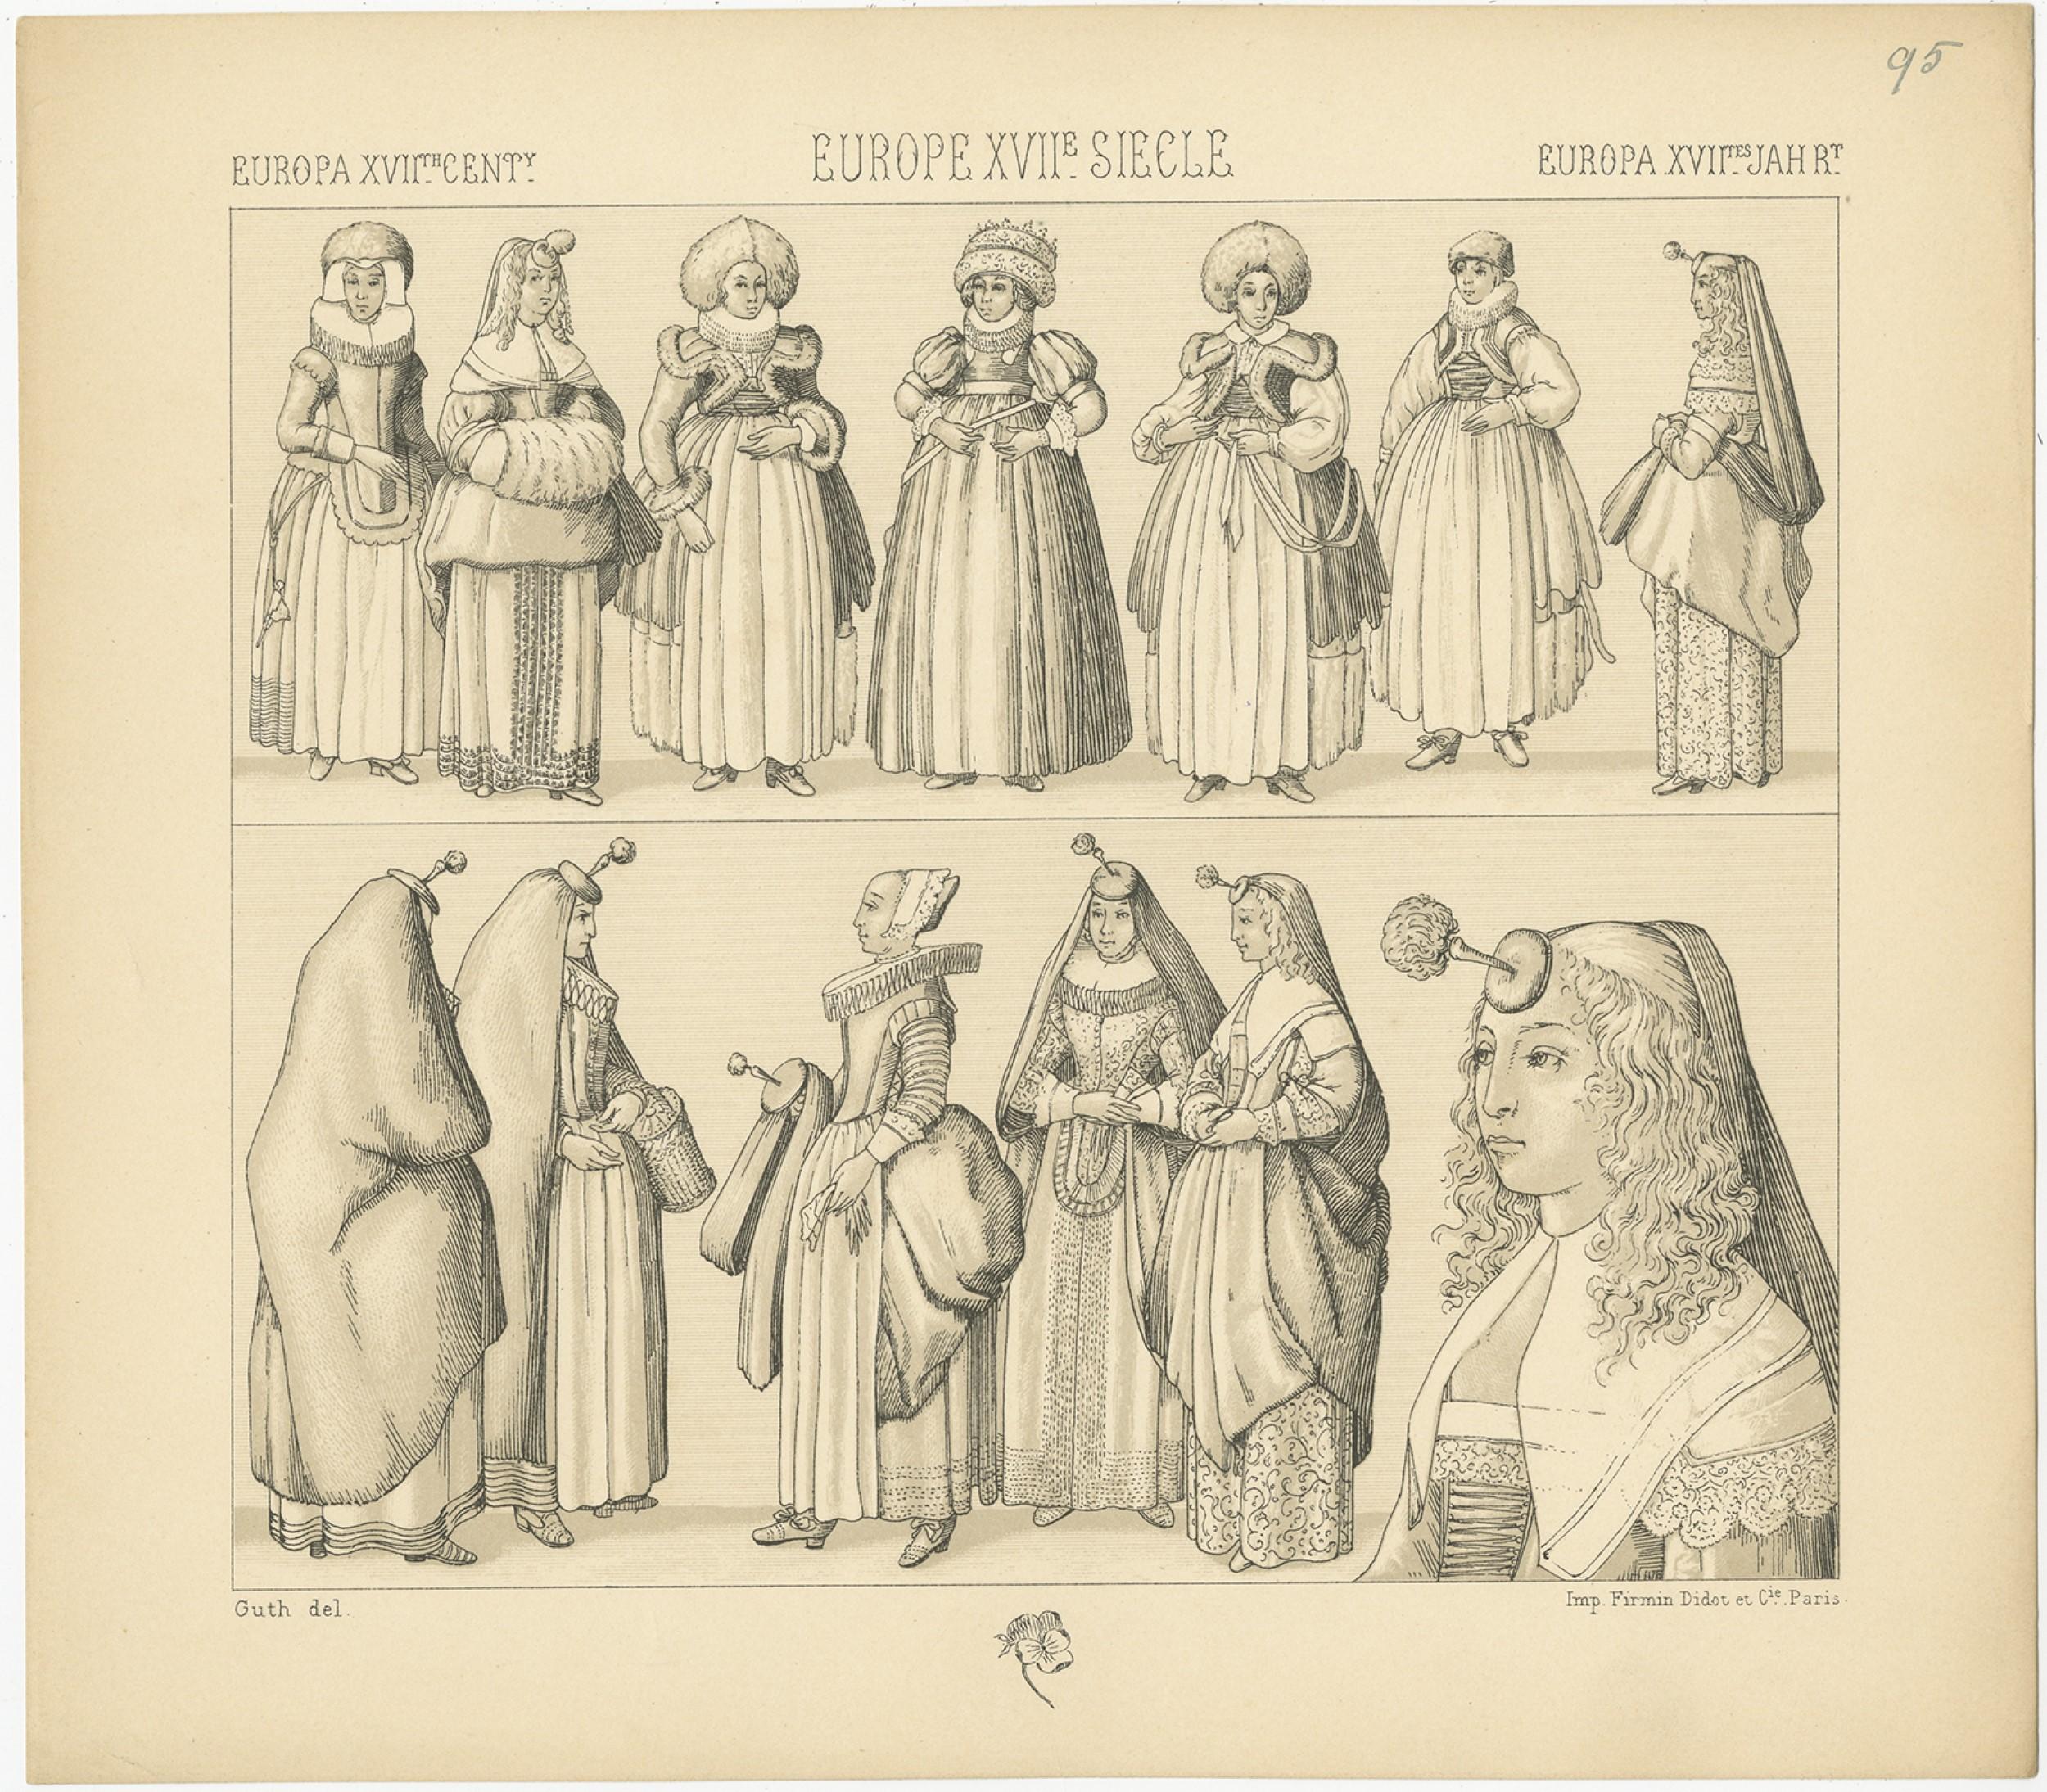 Antique print titled 'Europa XVIIth Cent - Europe XVIIe Siecle - Europa XVIItes Jahr'. Chromolithograph of European XVIIth Century Costumes. This print originates from 'Le Costume Historique' by M.A. Racinet. Published, circa 1880.